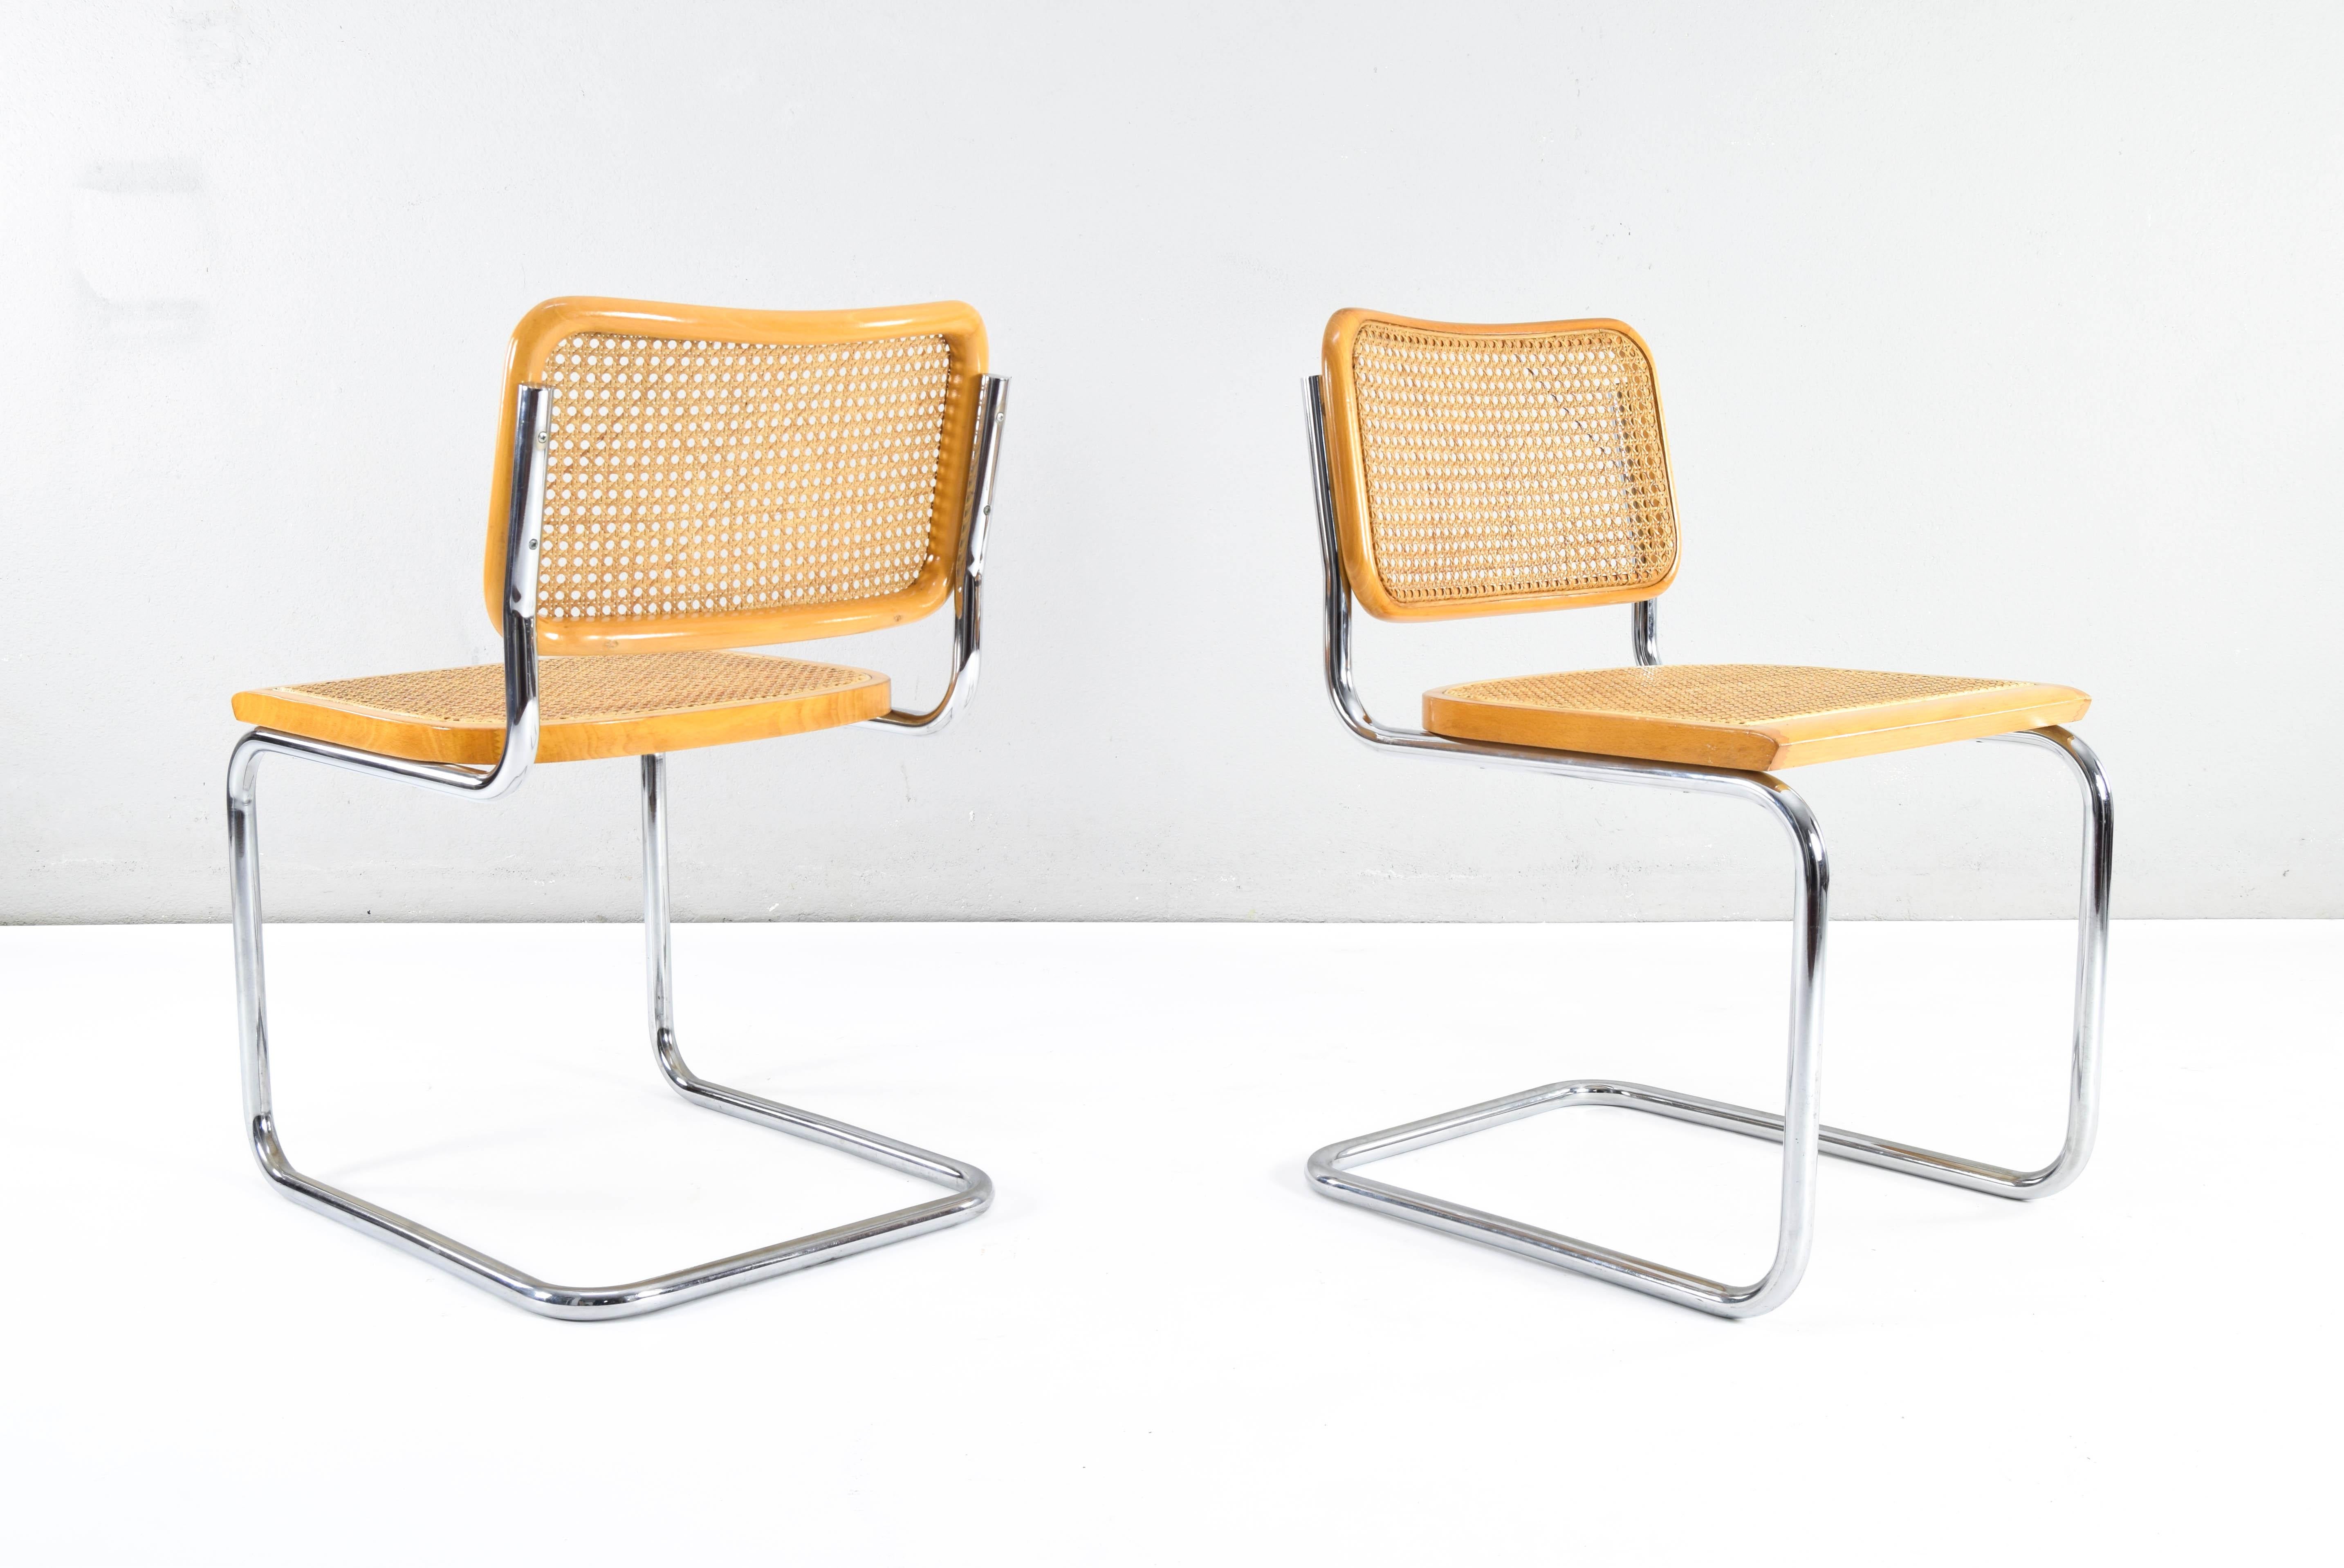 Italian Set of Two Mid-Century Modern Marcel Breuer B32 Blonde Cesca Chairs, Italy 1970s For Sale